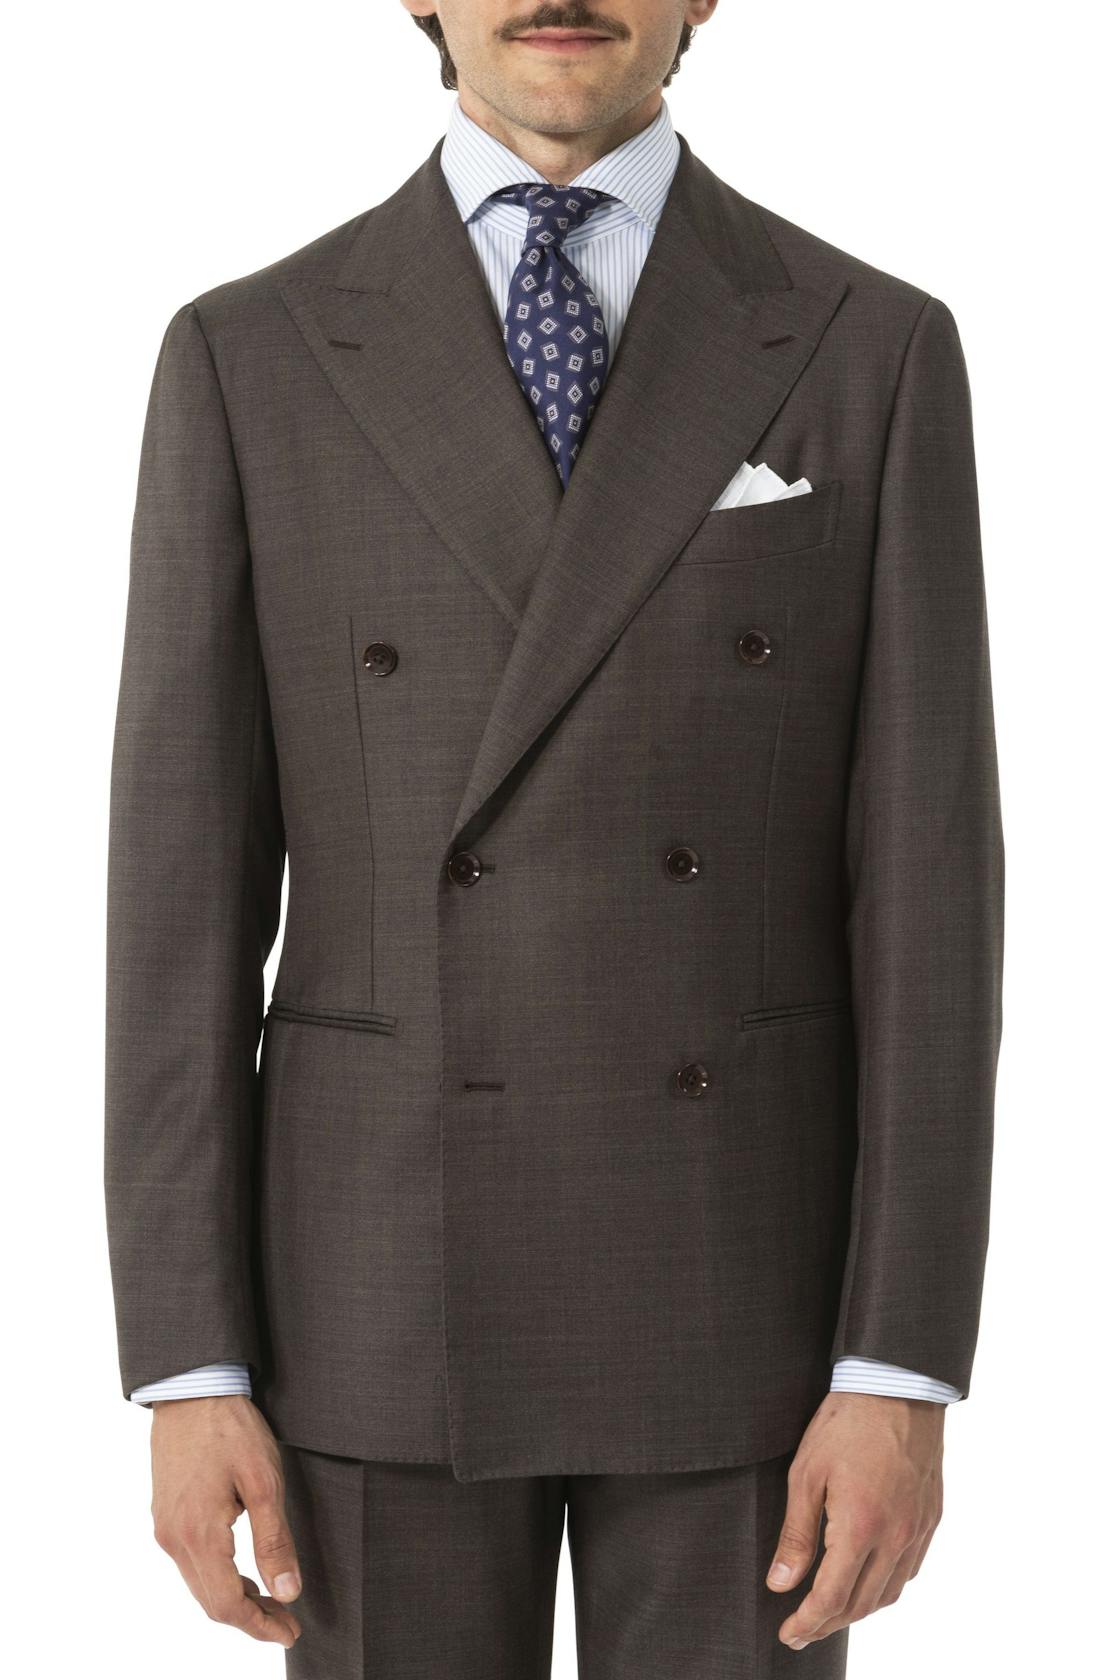 The Armoury by Ring Jacket Model 6B Brown Wool Shark Skin Suit